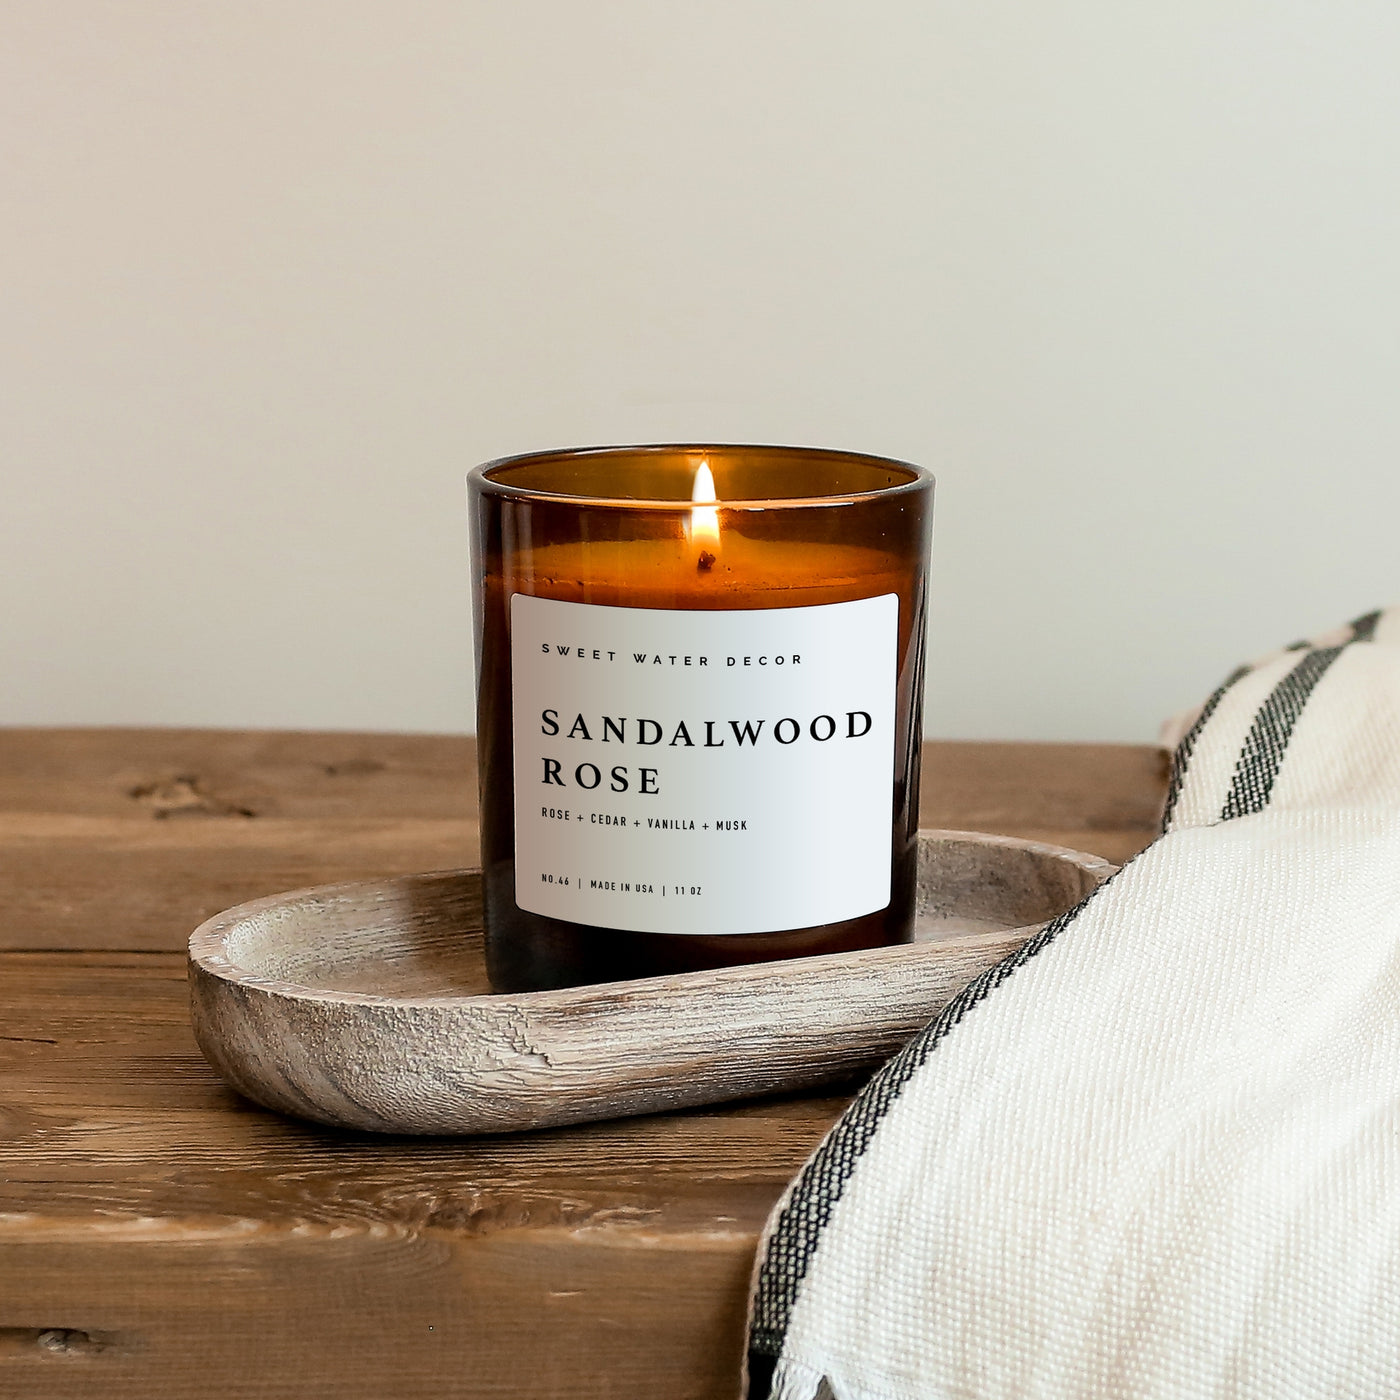 Non-Toxic Soy Candle: Scent Sandalwood Rose, 11oz soy wax, with a Clean burn time of 60+ hours